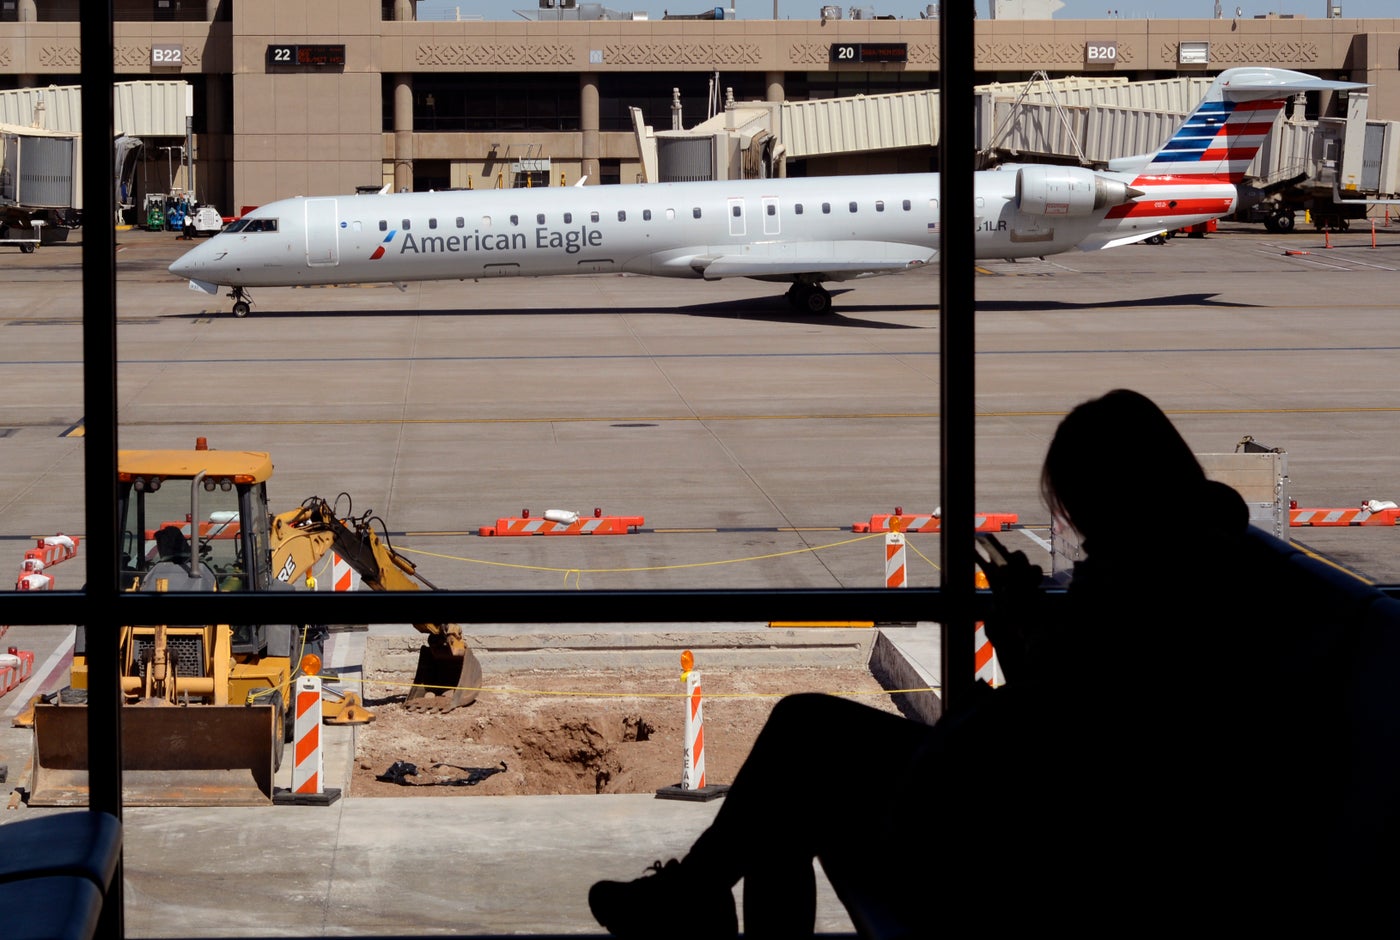 It's About to Become Much More Expensive to Eat at the Phoenix Airport